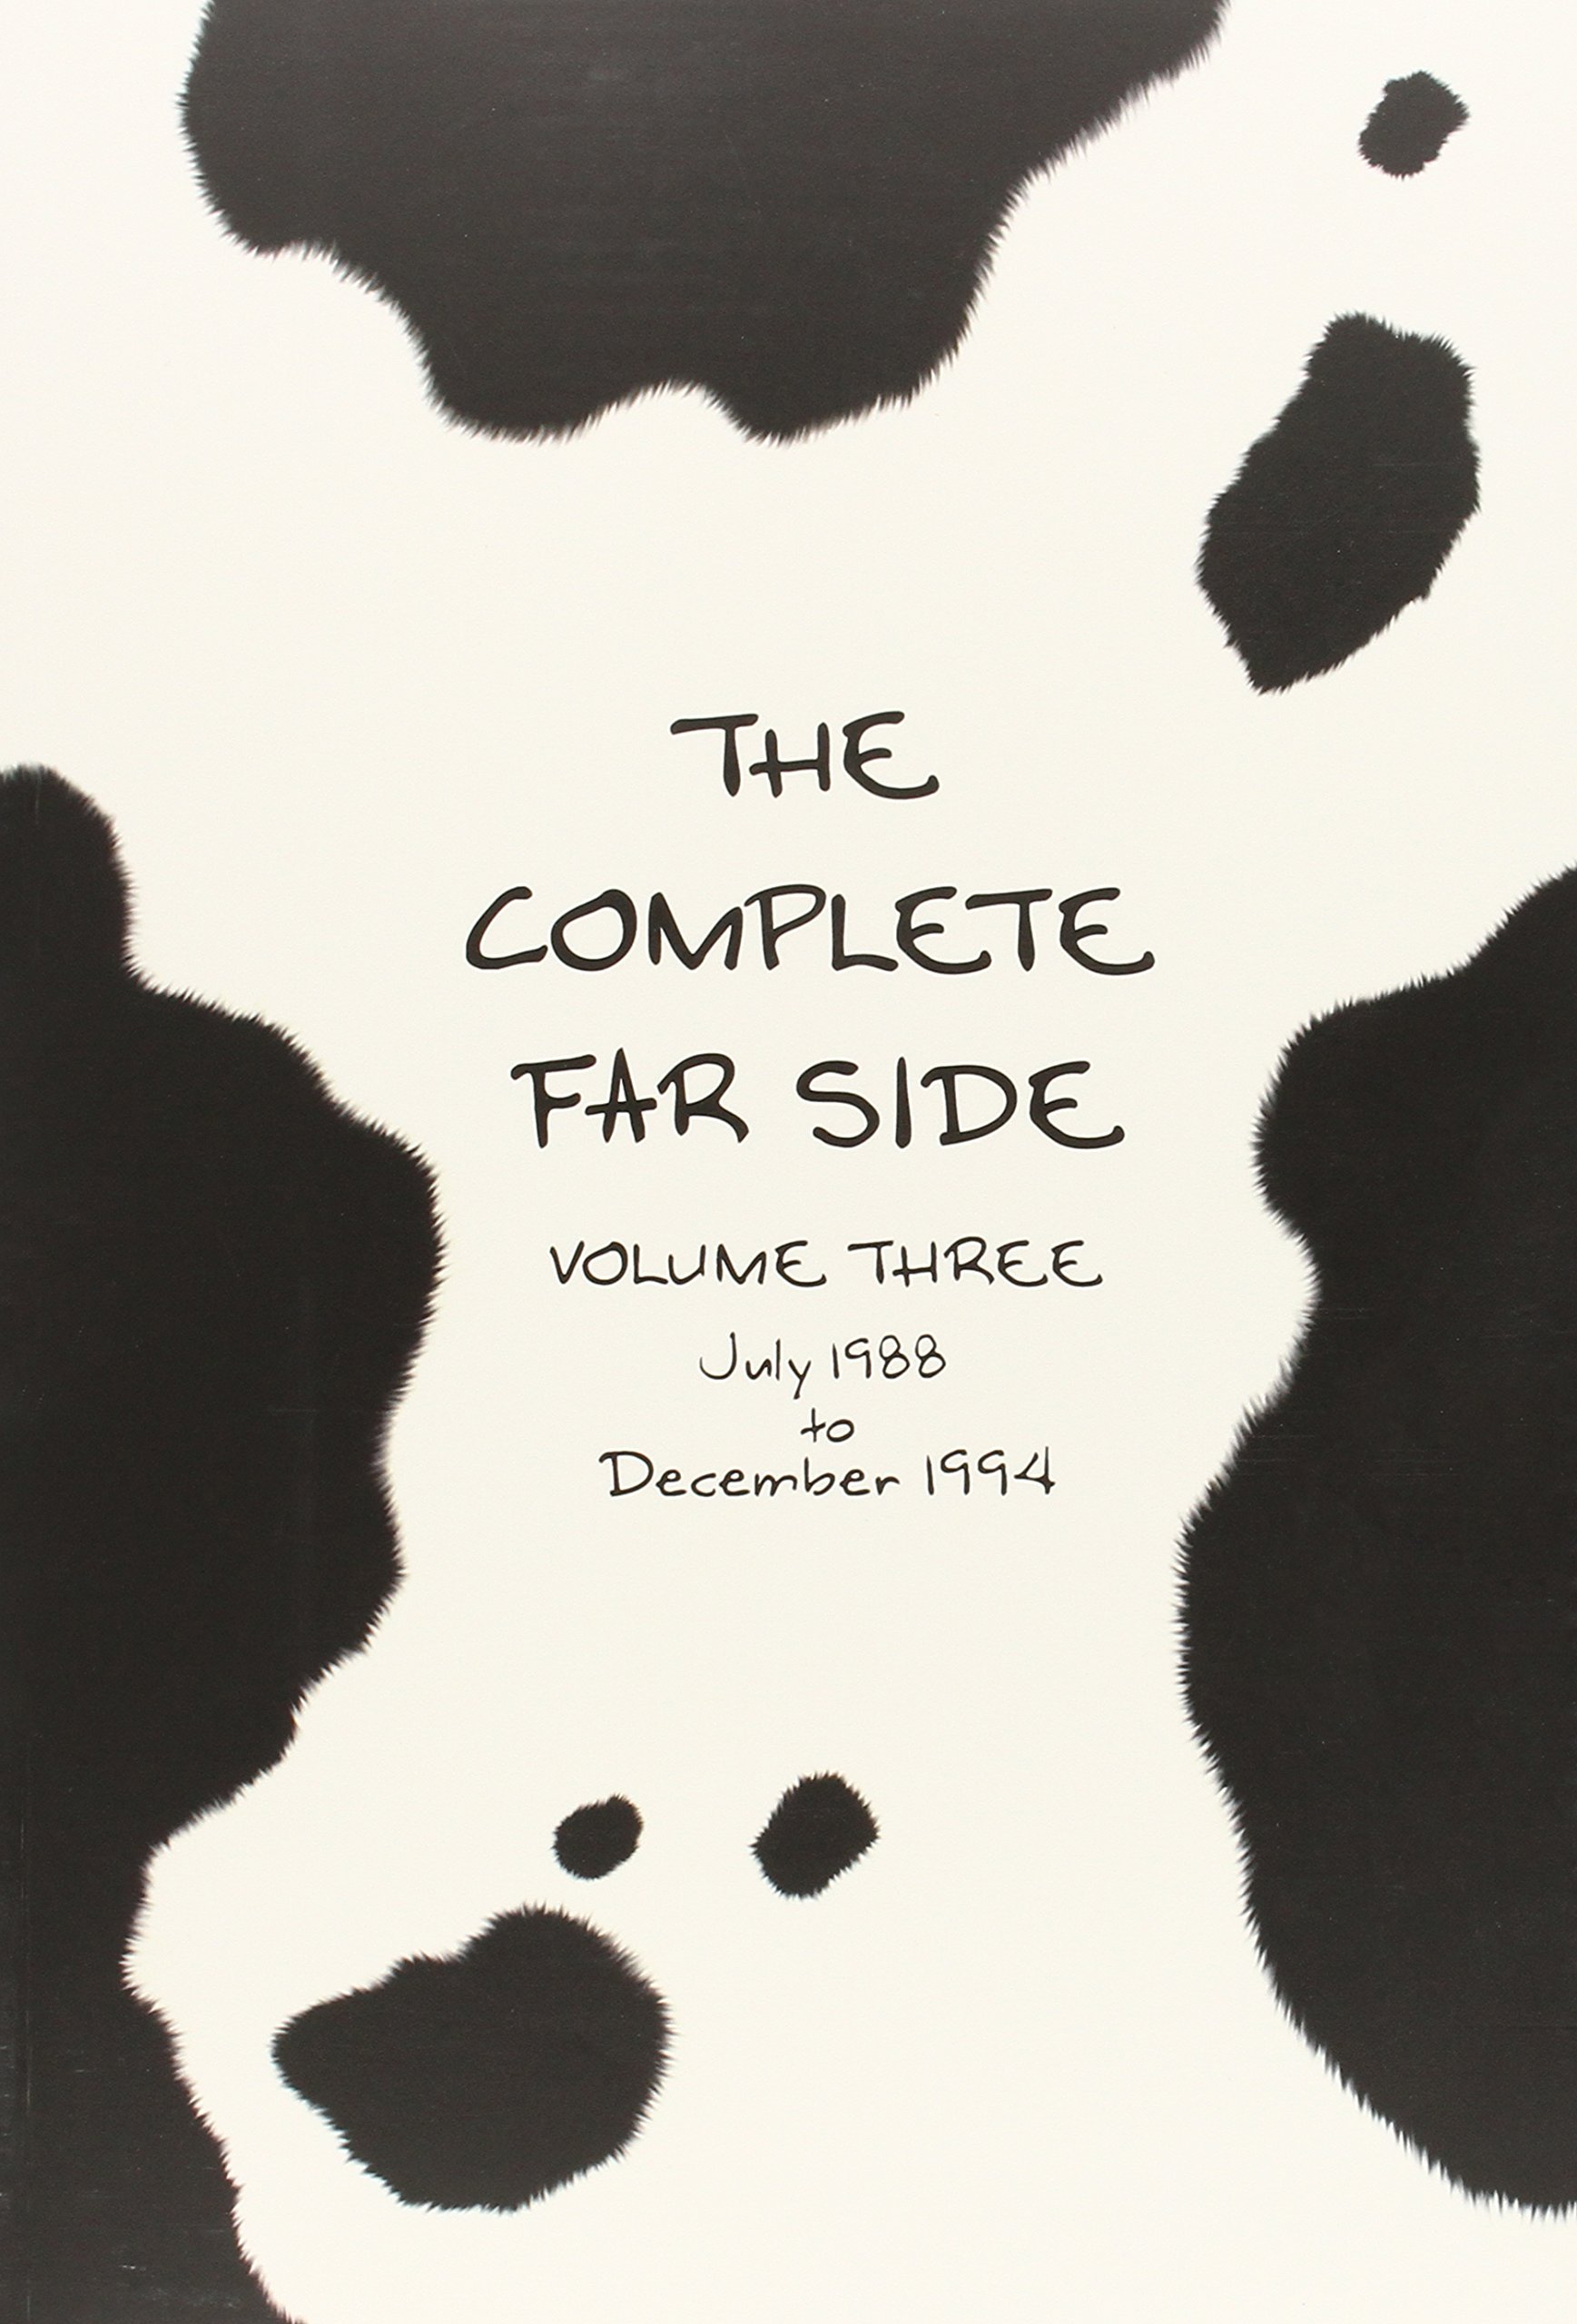 The complete Far side (2014, Andrews McMeel Pub.)